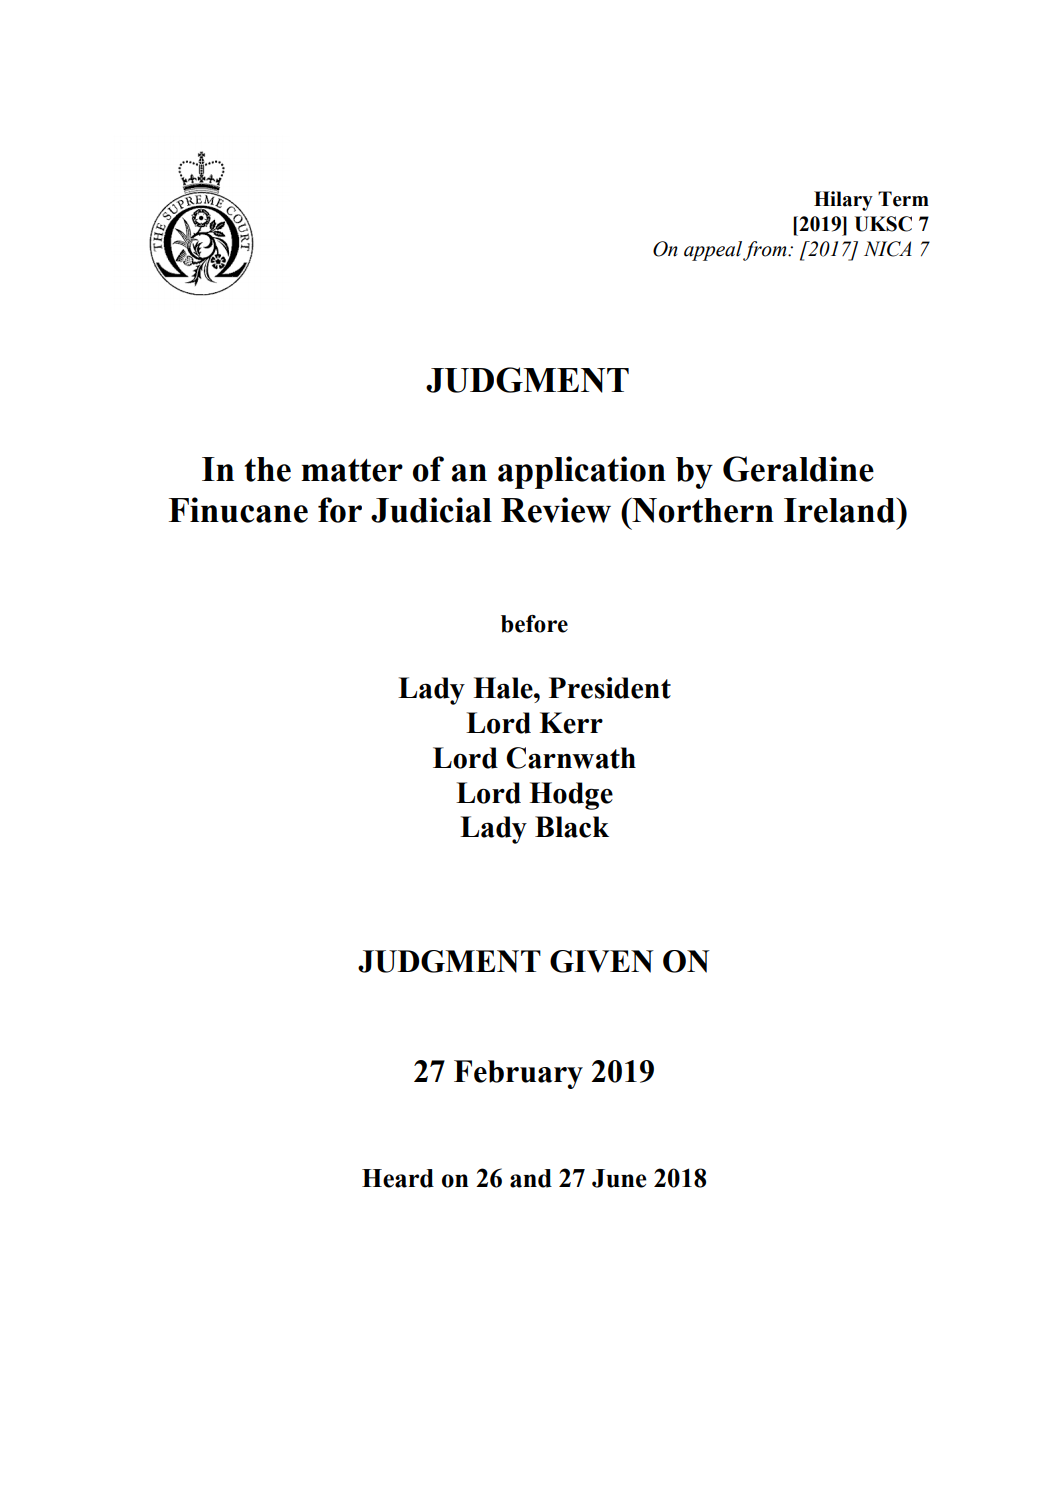 UK Supreme Court Judgment - In the matter of an application by Geraldine Finucane for Judicial Review (Northern Ireland)